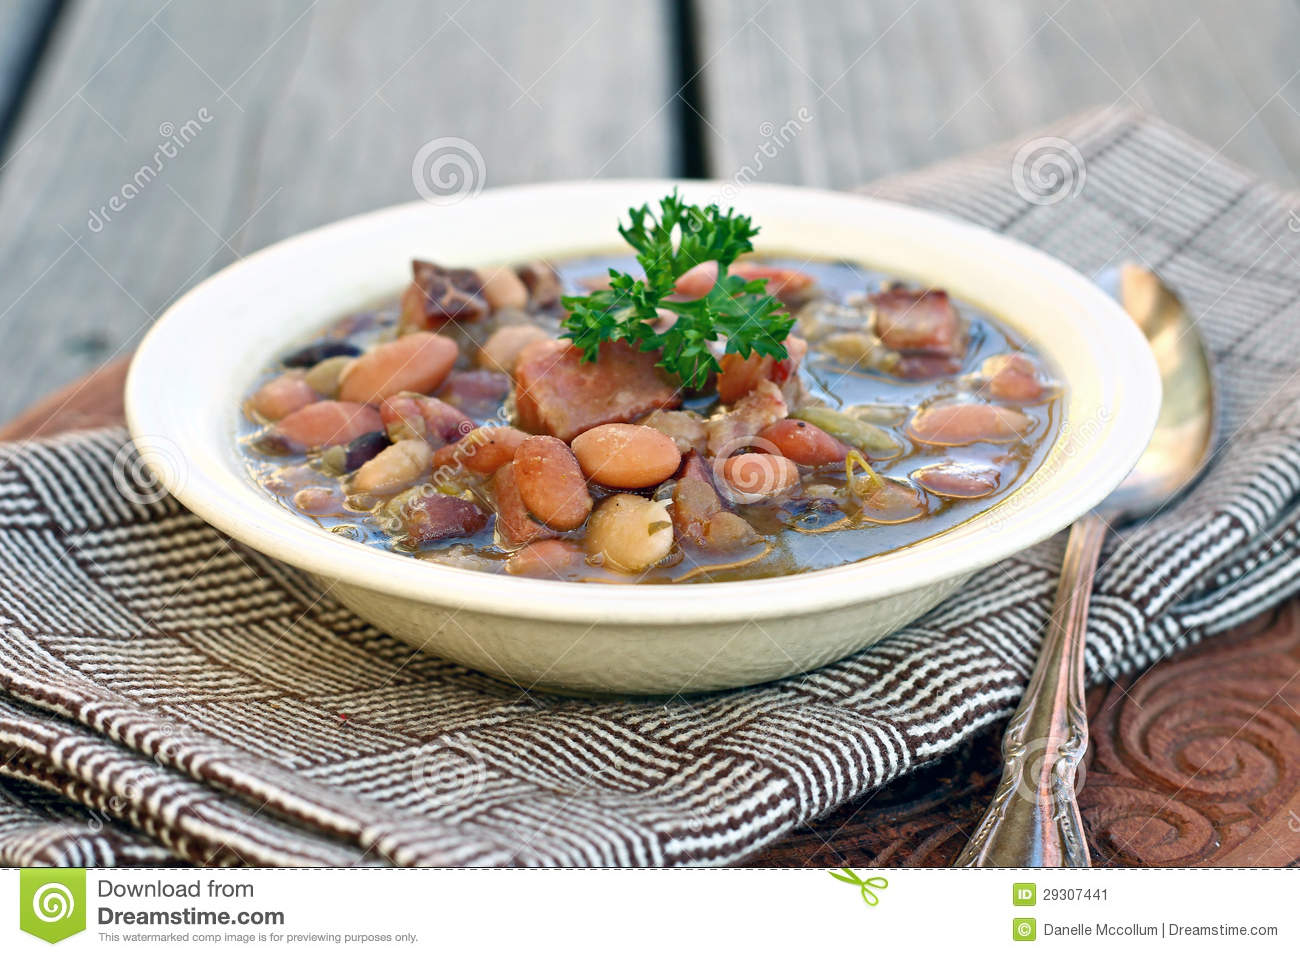 Ham And Bean Soup Stock Image   Image  29307441